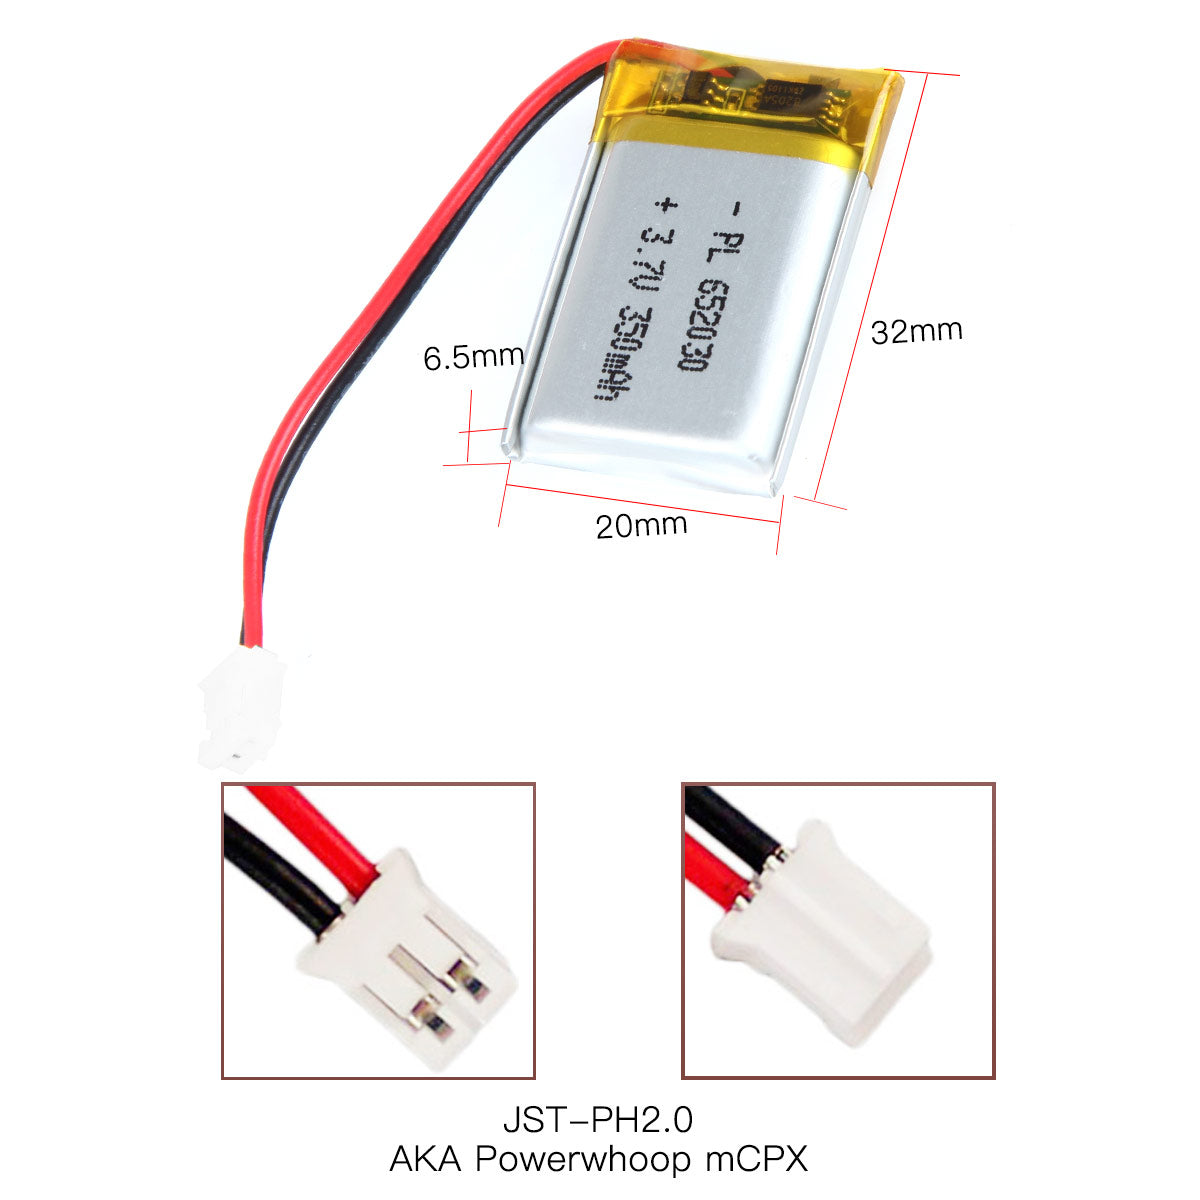 YDL 3.7V 350mAh 652030 Rechargeable Lithium Polymer Battery Length 32mm